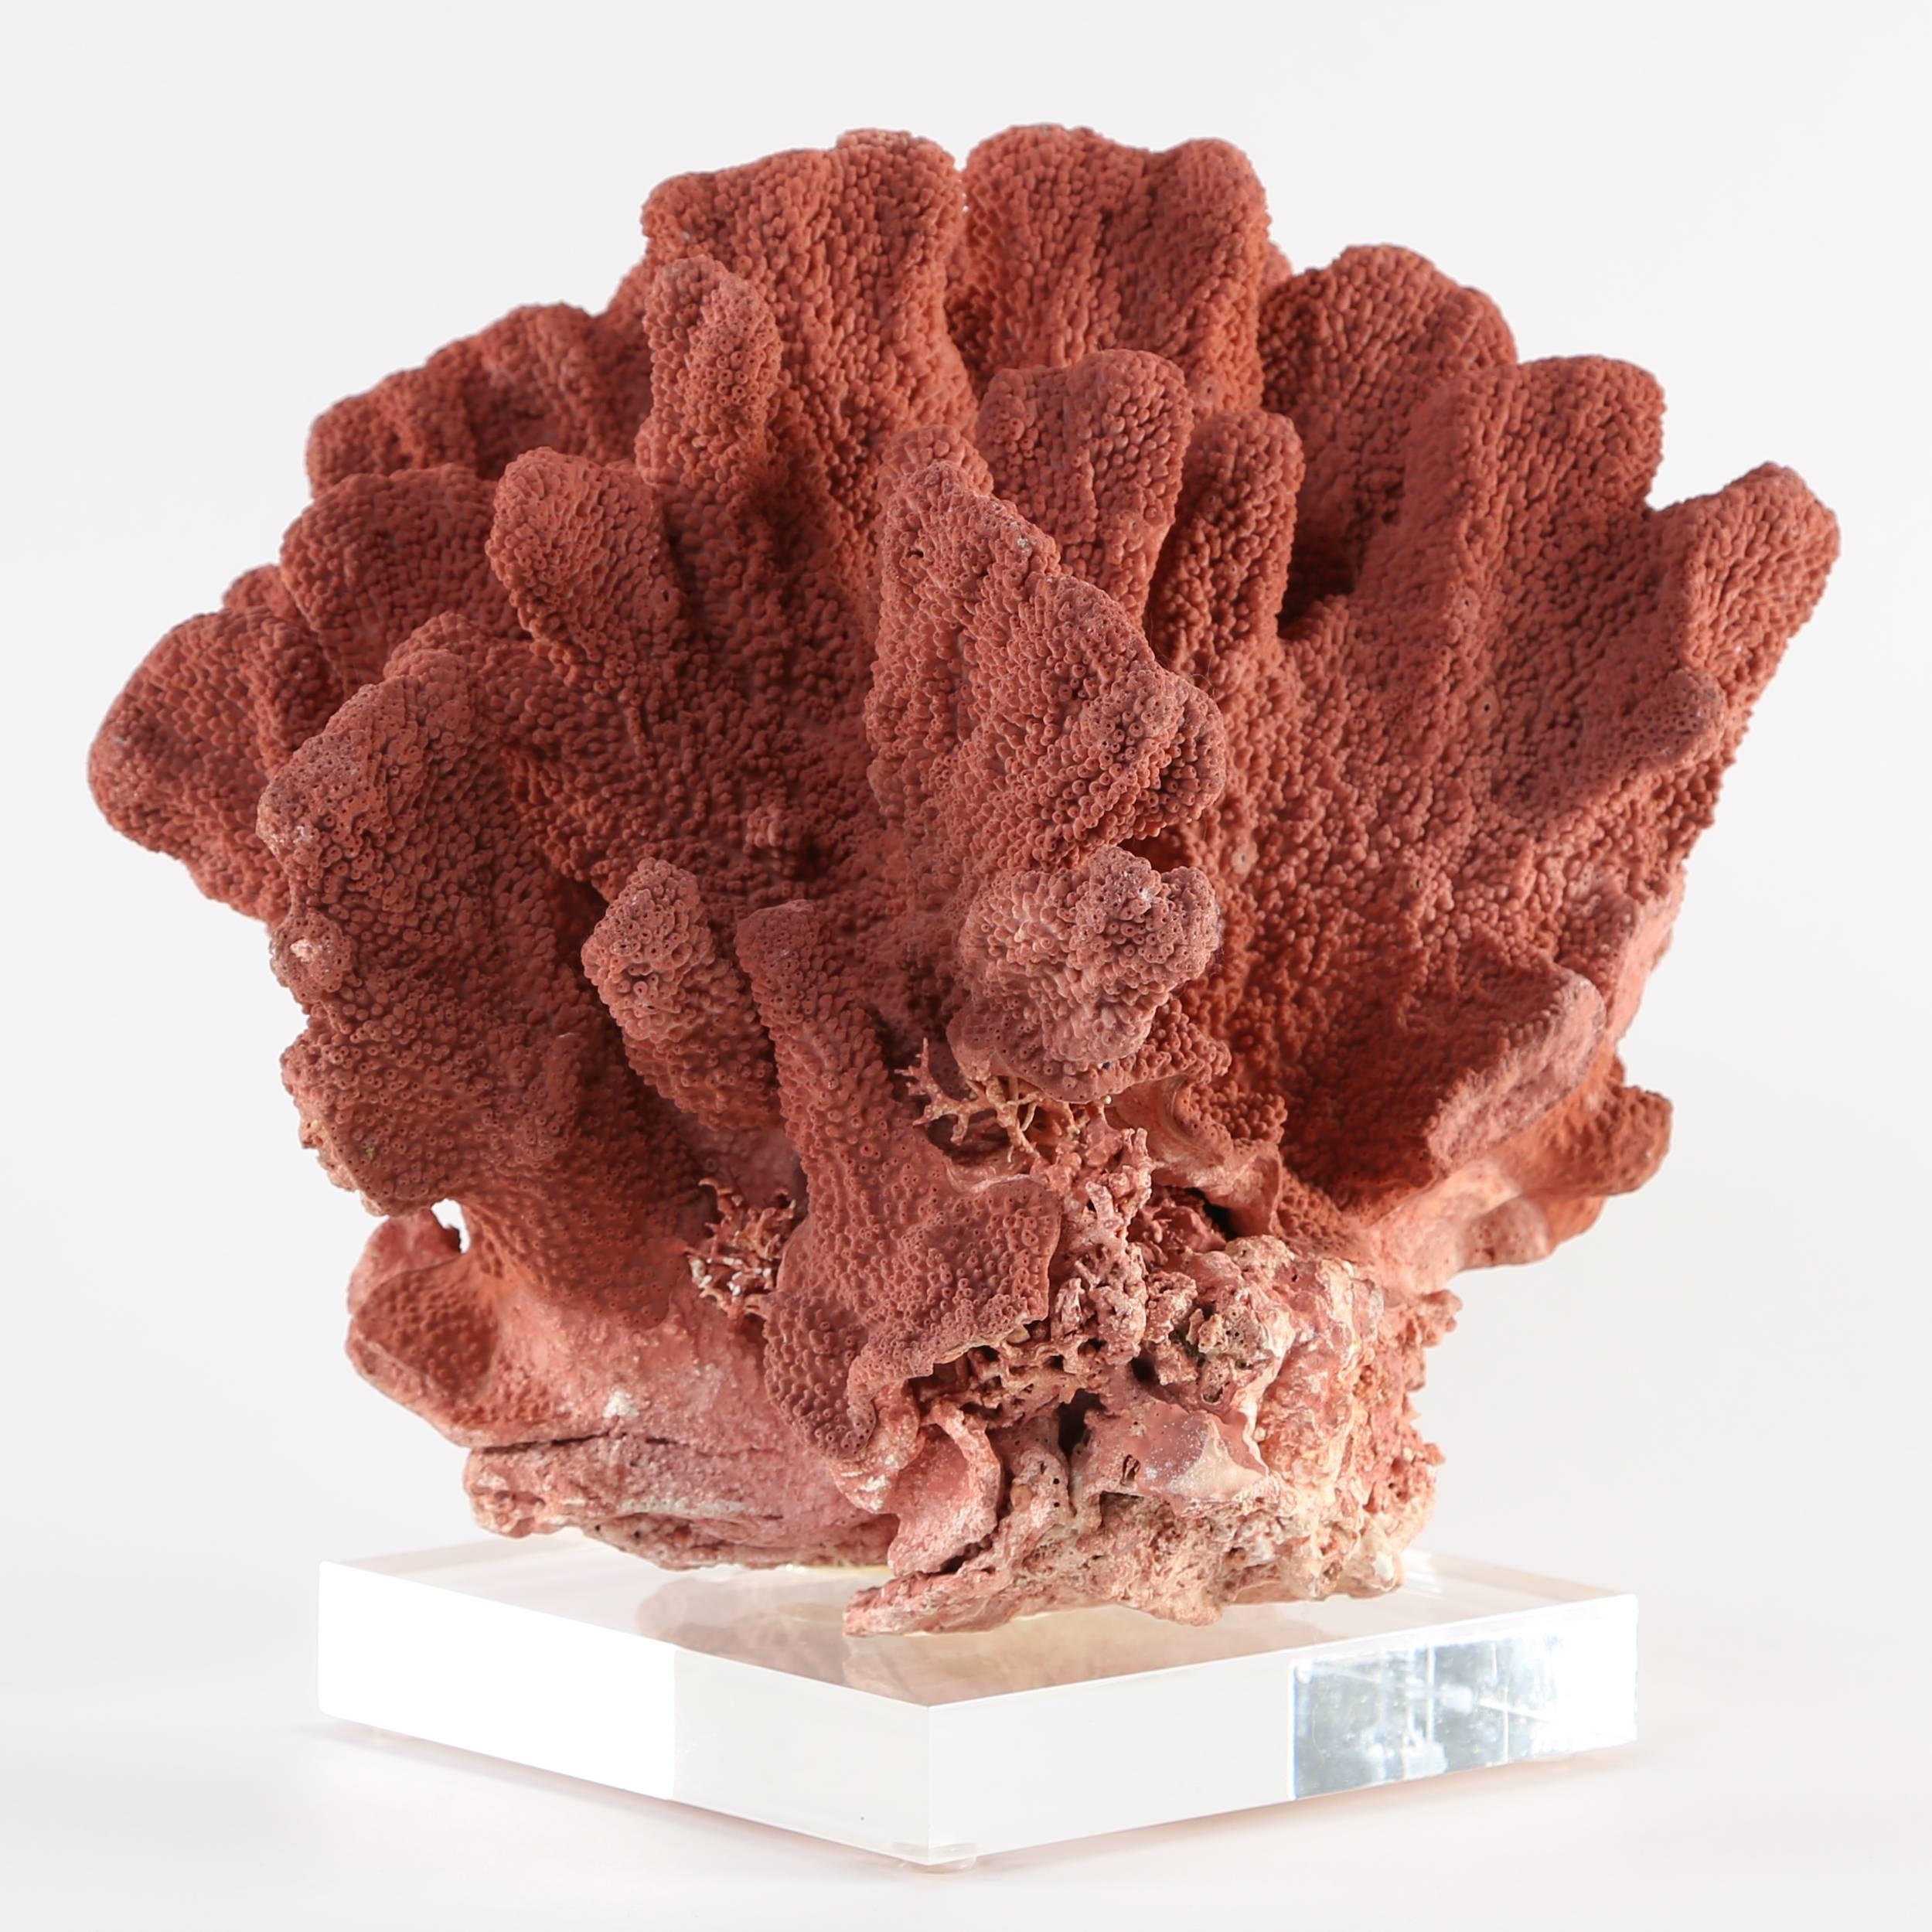 A lovely vintage red coral specimen mounted on a block of polished Lucite. Measures: Overall 10-1/2" W x 8-1/2" D x 10" H; base is 5-3/4" square x 1" H. This item is in our Brooklyn showroom.